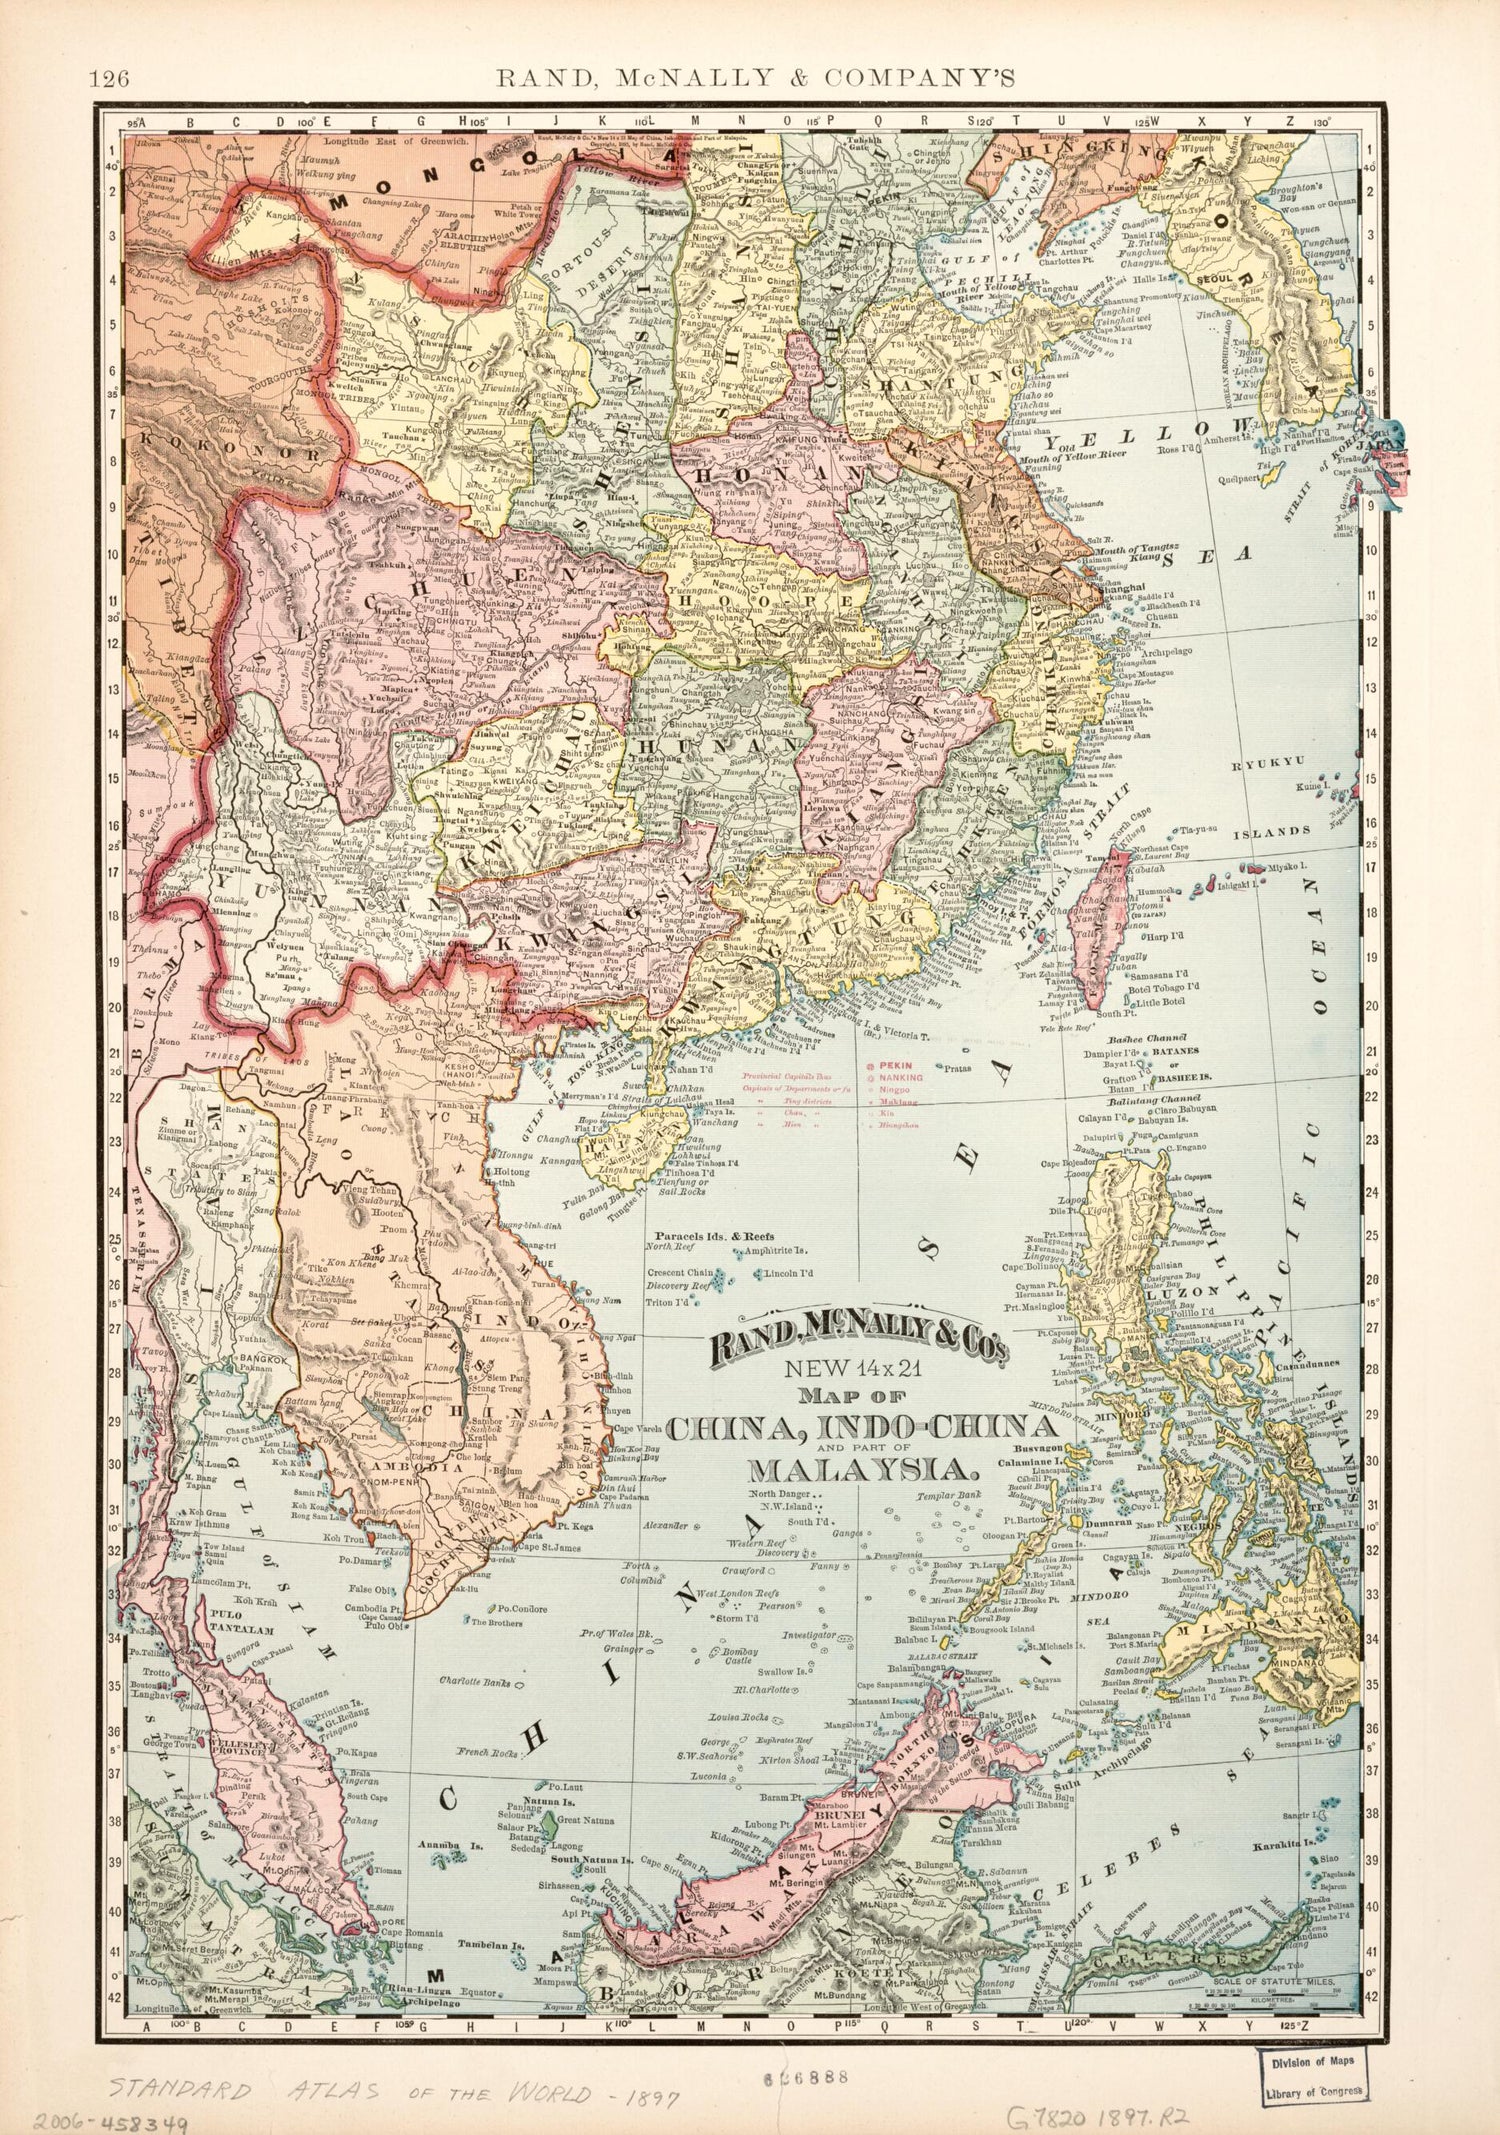 This old map of China, and Part of Malasysia from 1897 was created by  Rand McNally and Company in 1897